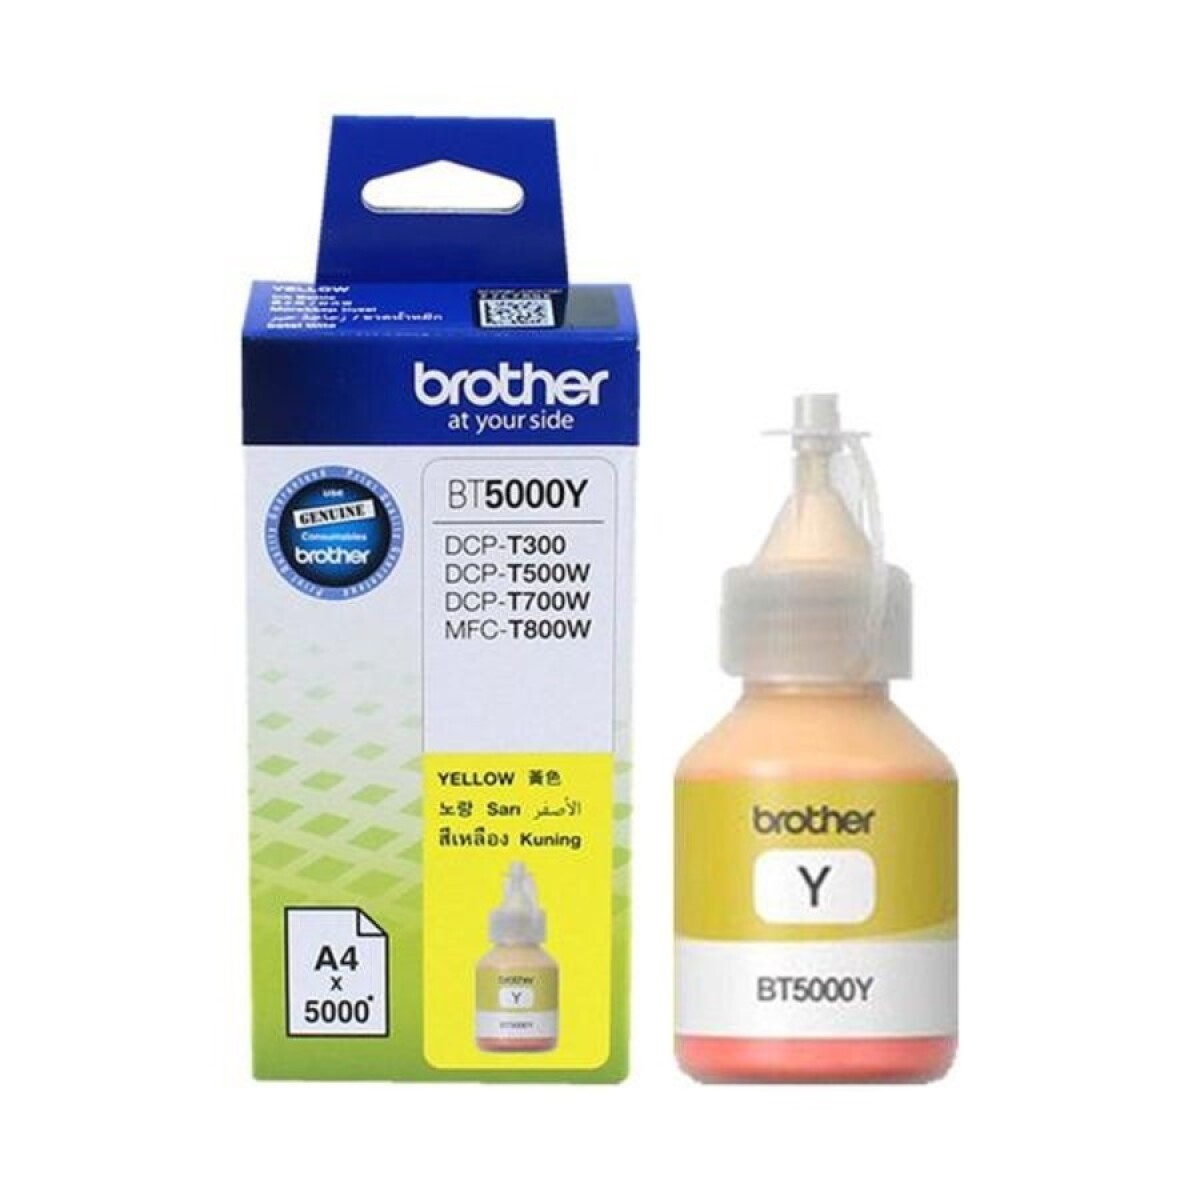 BROTHER BT5001Y AMARILLO BOTELLA T300/T500W - Brother Bt5001y Amarillo Botella T300/t500w 